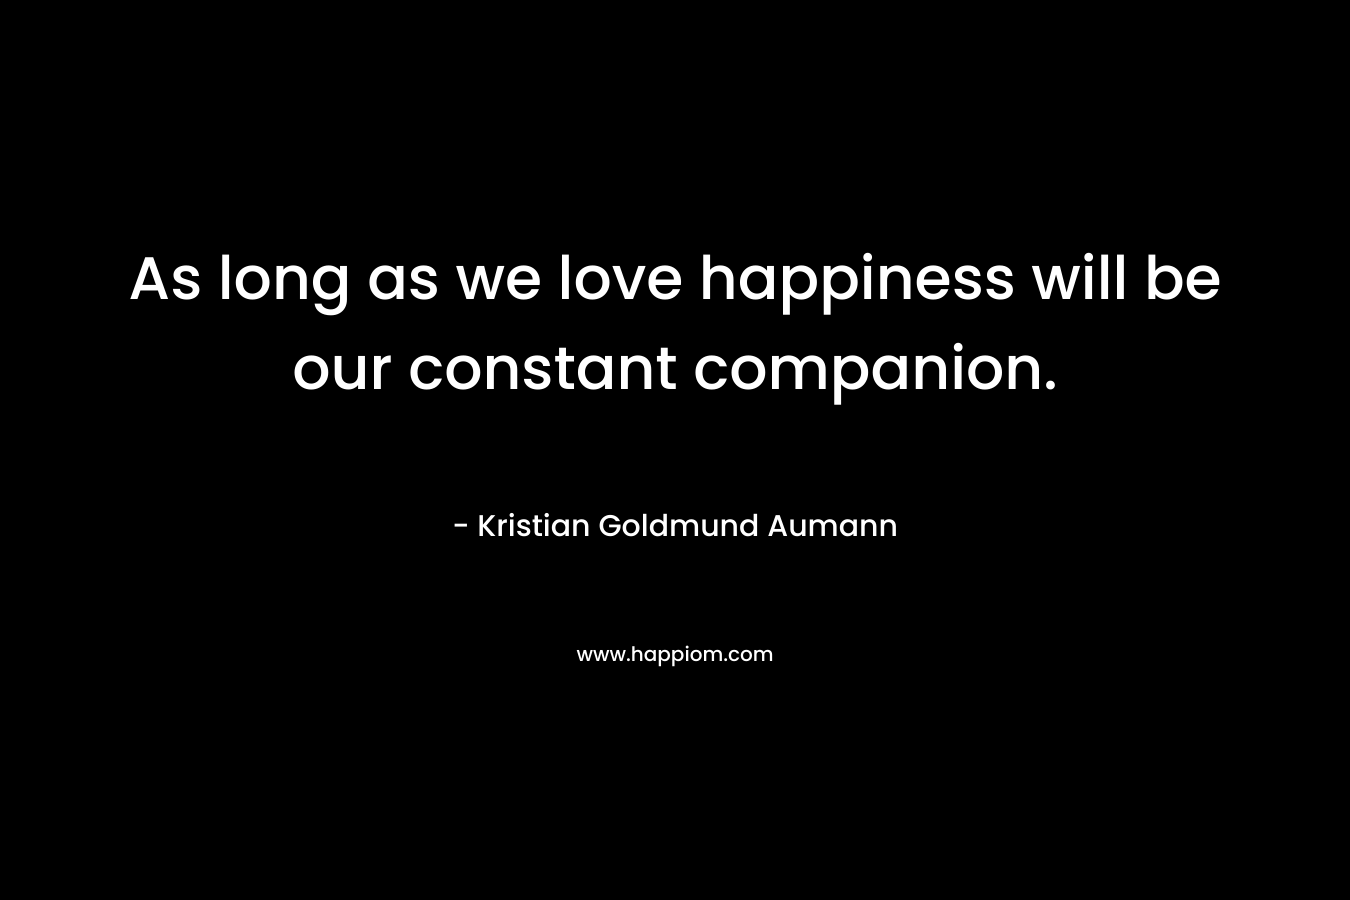 As long as we love happiness will be our constant companion. – Kristian Goldmund Aumann